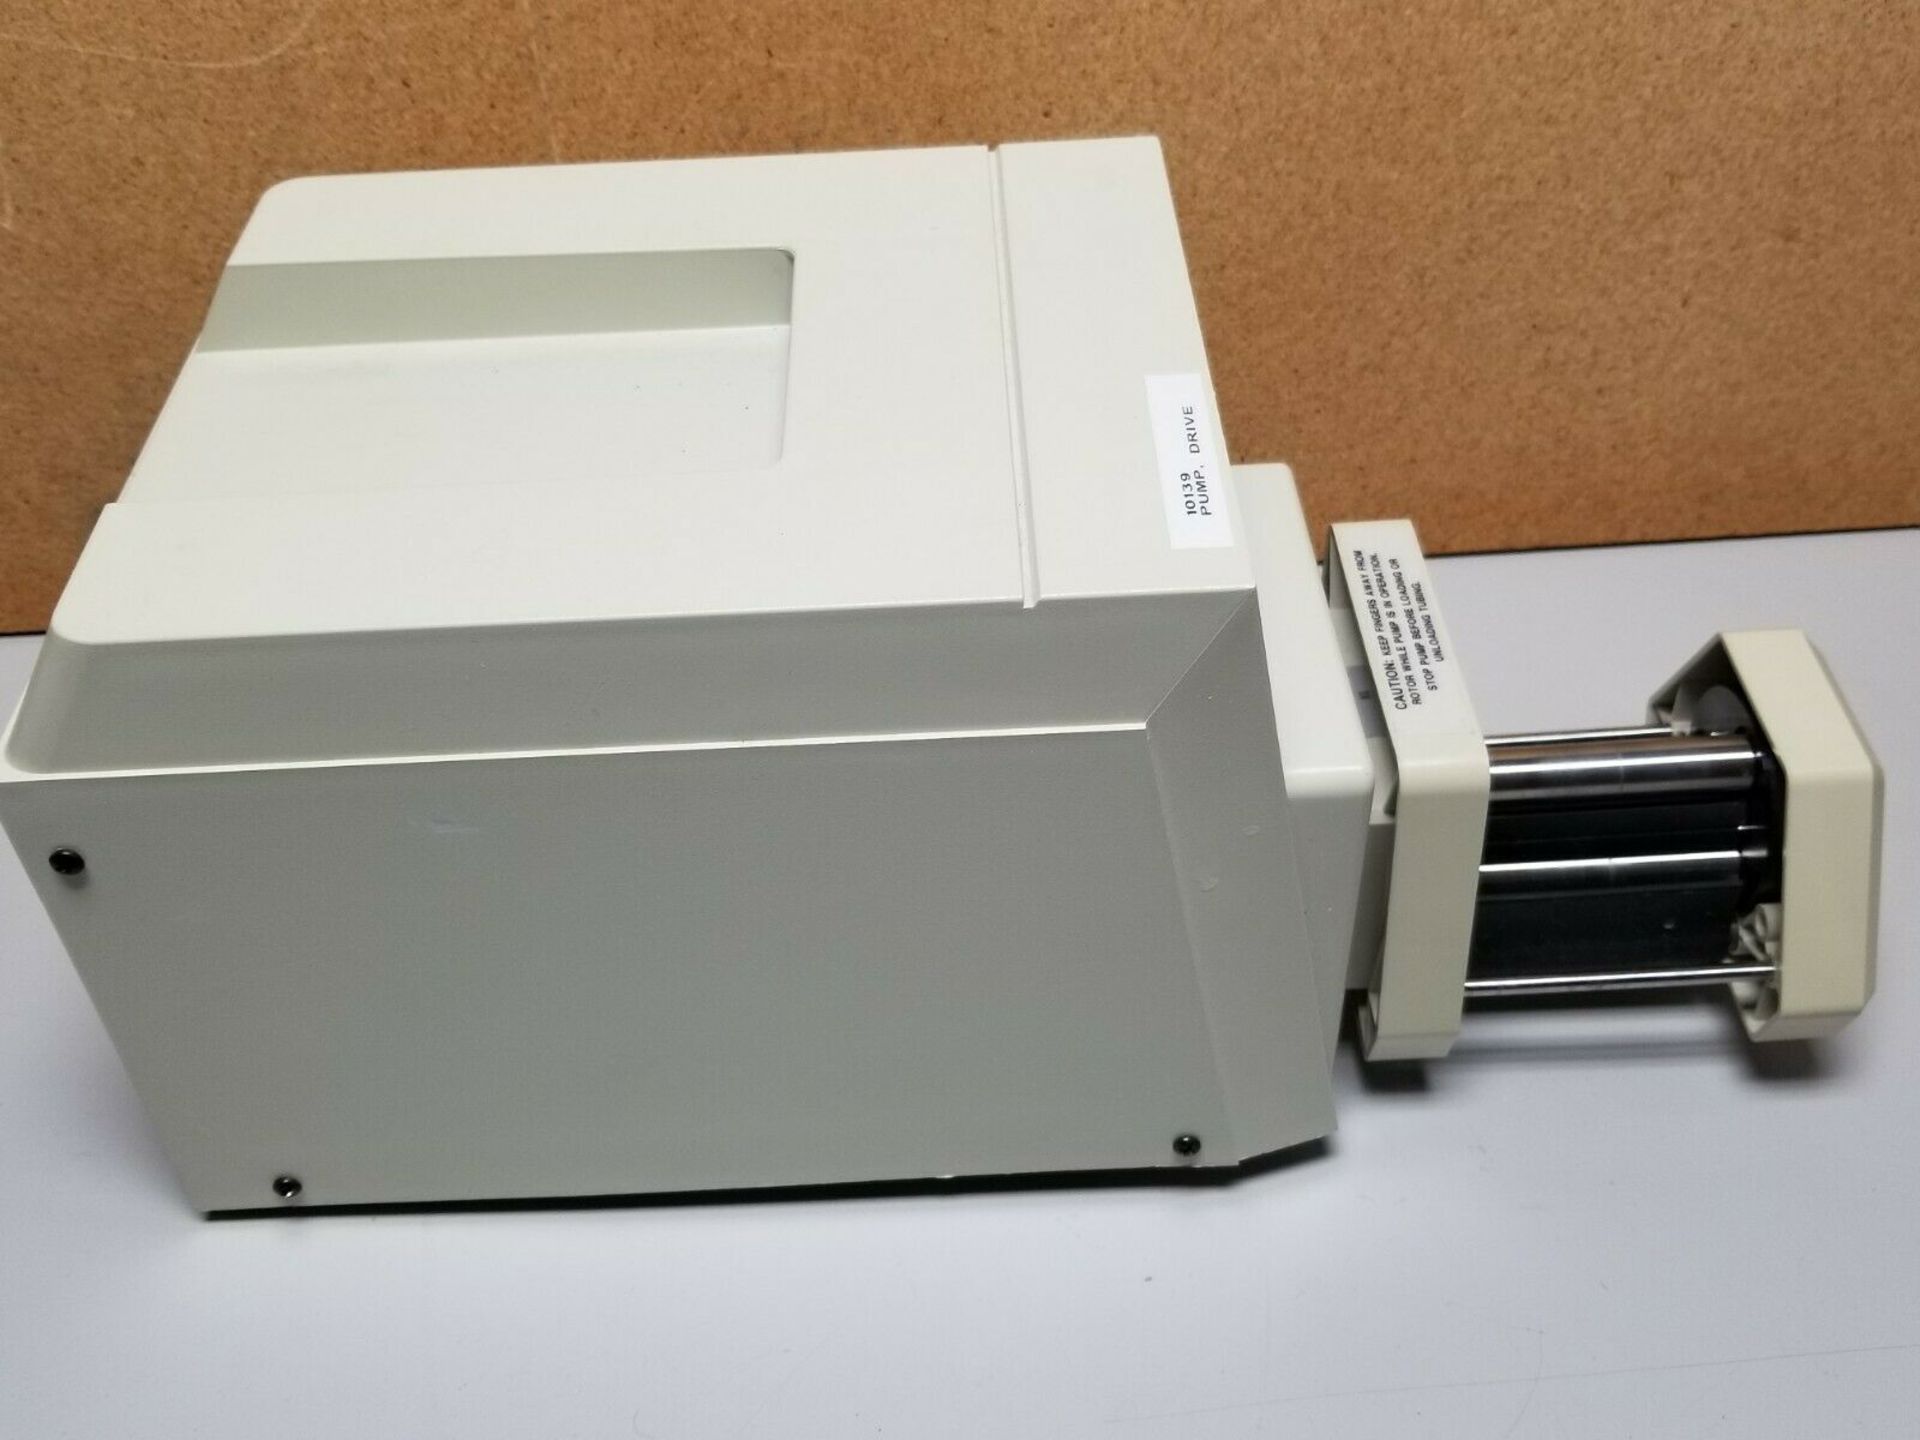 Cole Parmer Masterflex Digital Drive With Cartridge Pump - Image 5 of 11